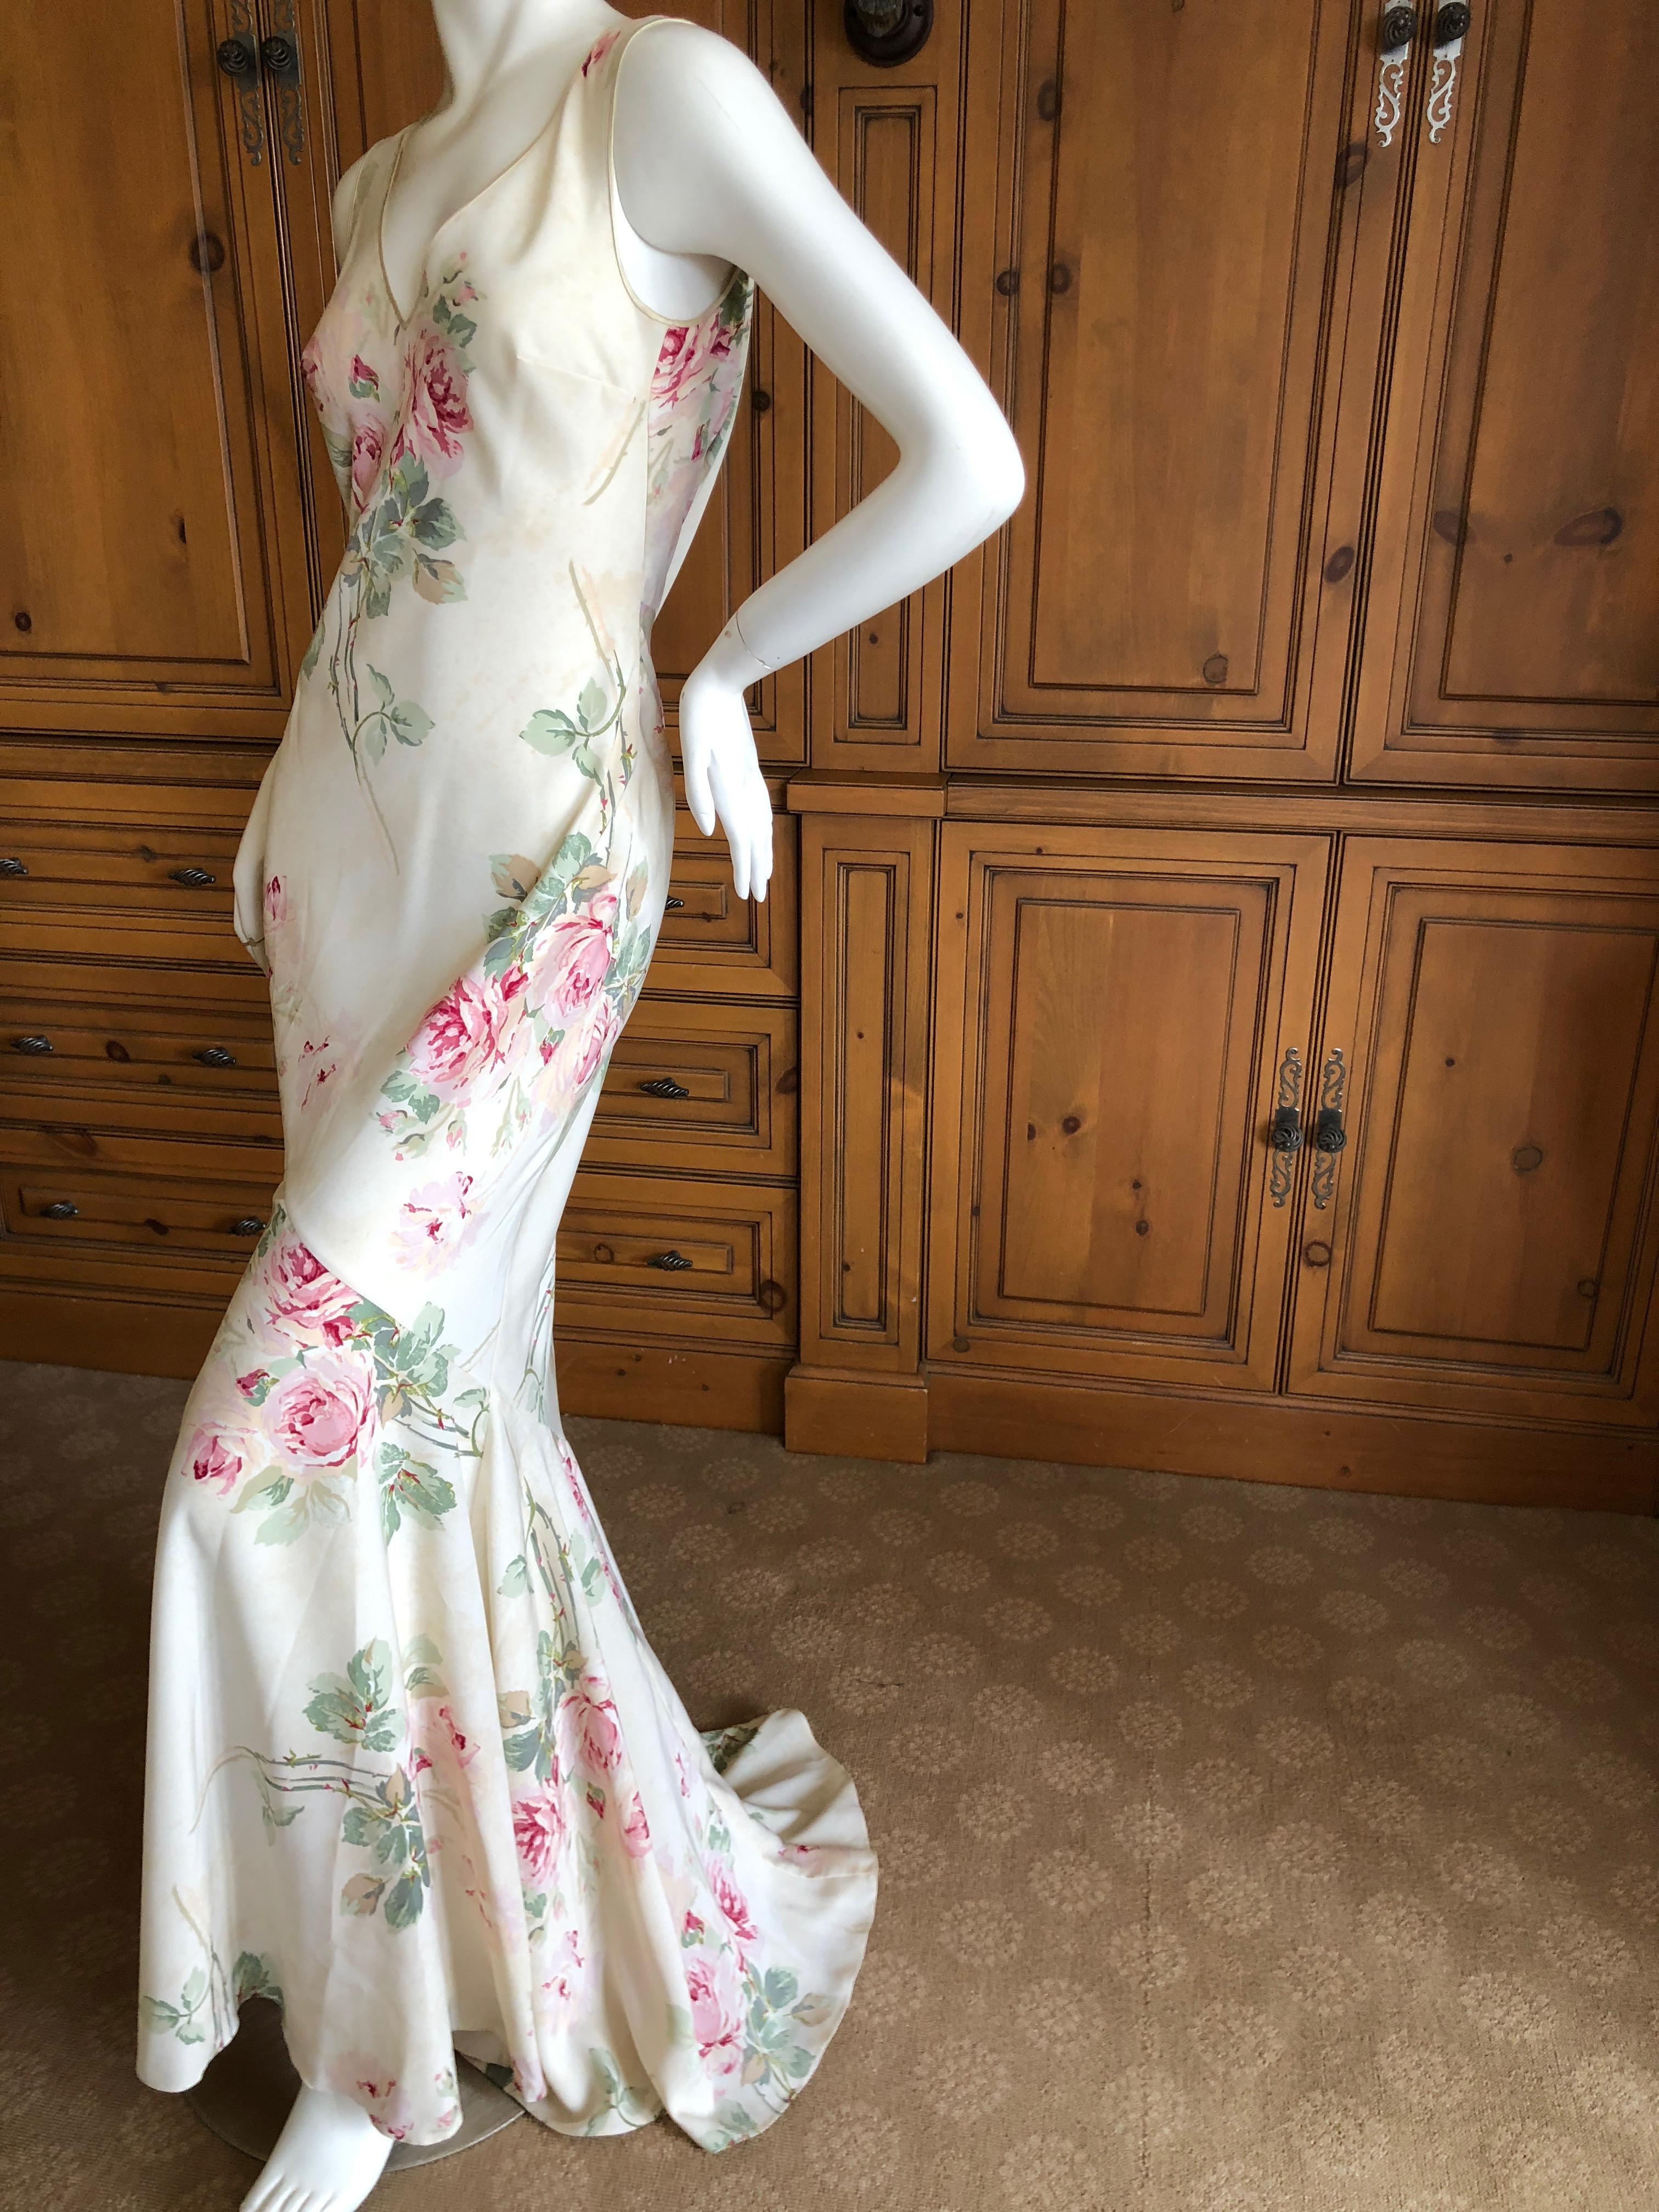 John Galliano Bias Cut Floral Dress with Draped Back and Train, 1990s  For Sale 5